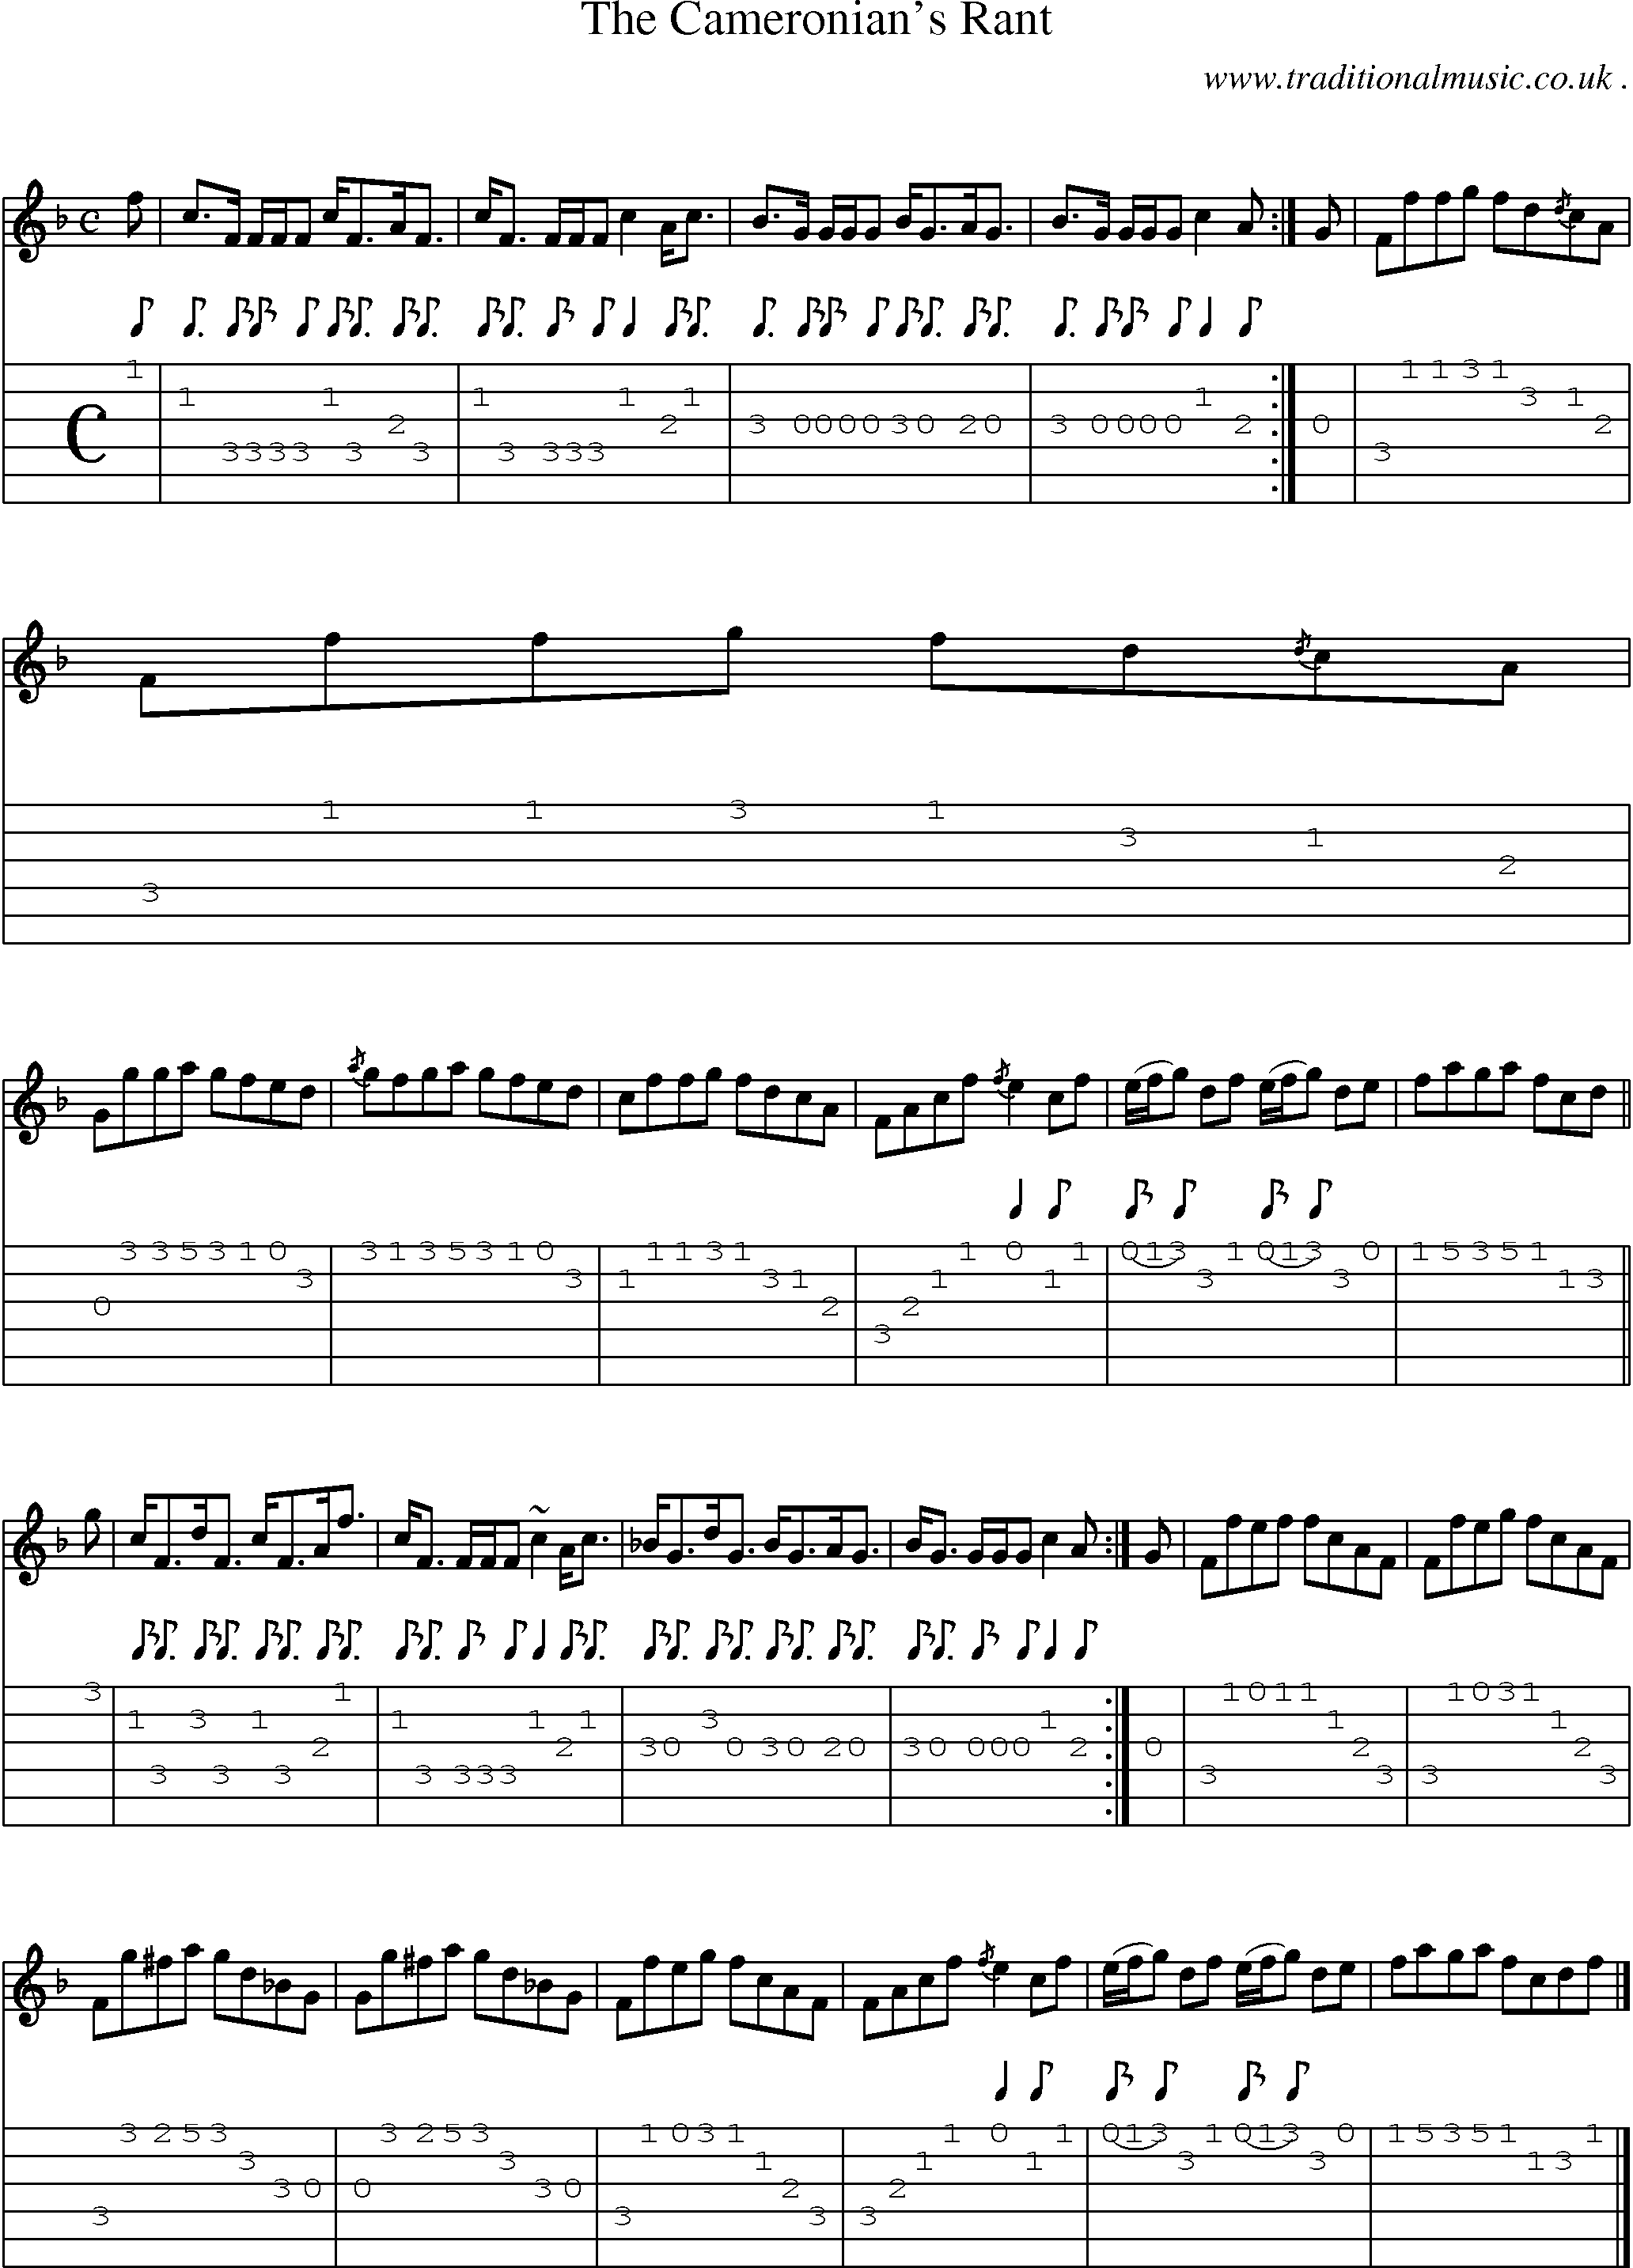 Sheet-music  score, Chords and Guitar Tabs for The Cameronians Rant